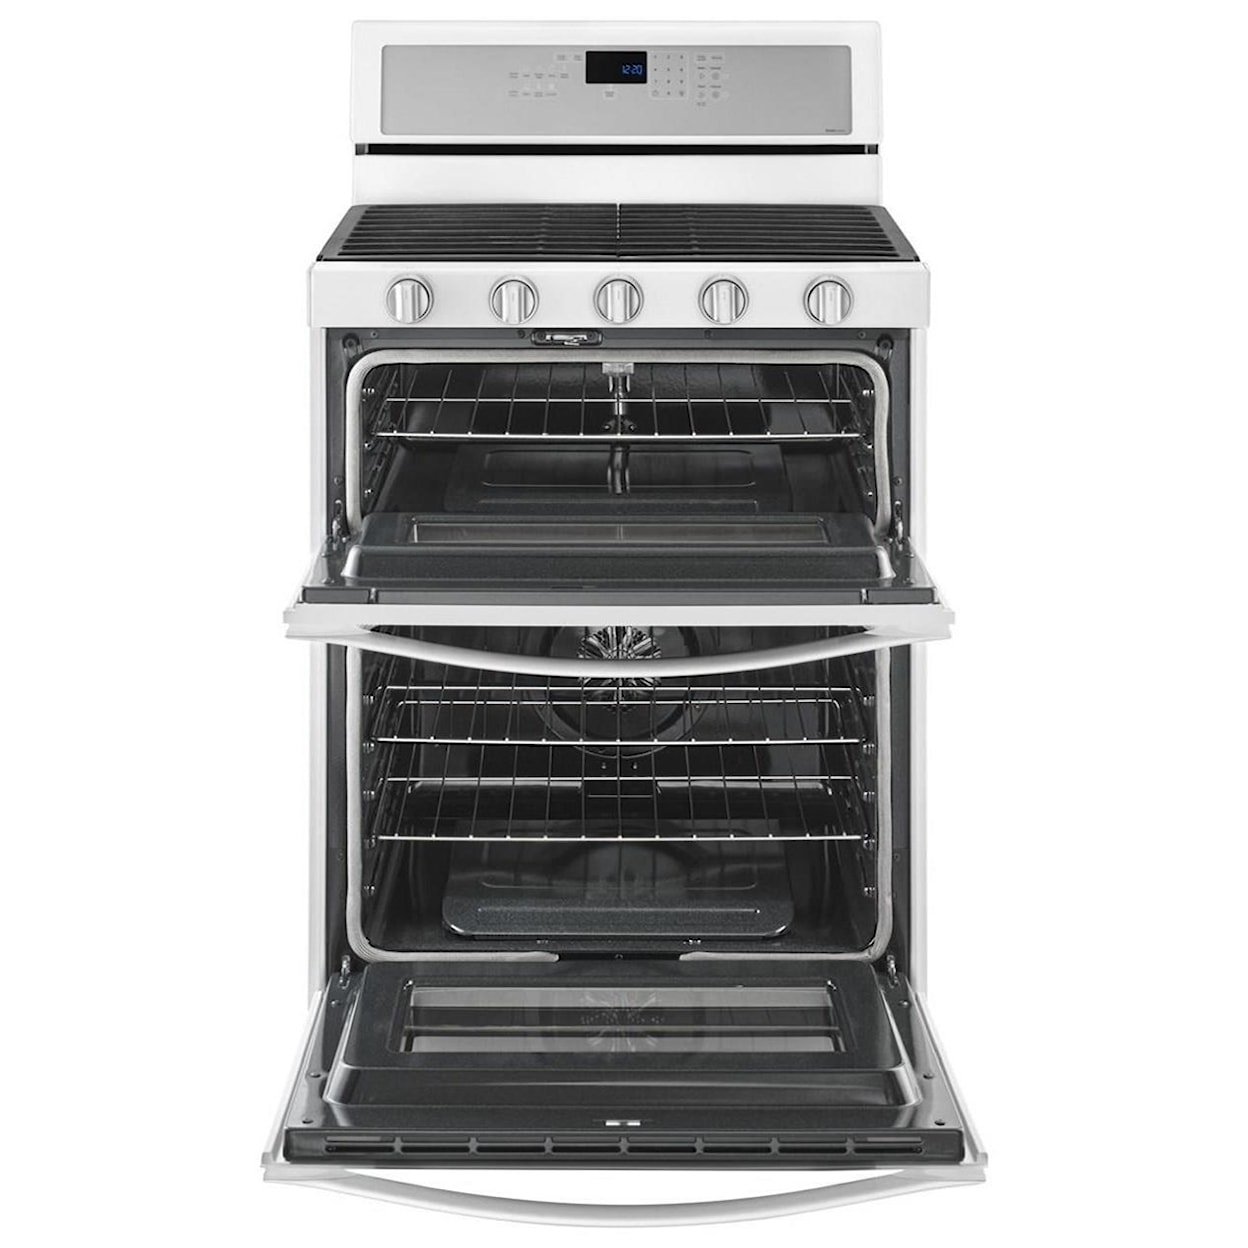 Whirlpool Gas Ranges 6.0 Cu. Ft. Gas Double Oven Range